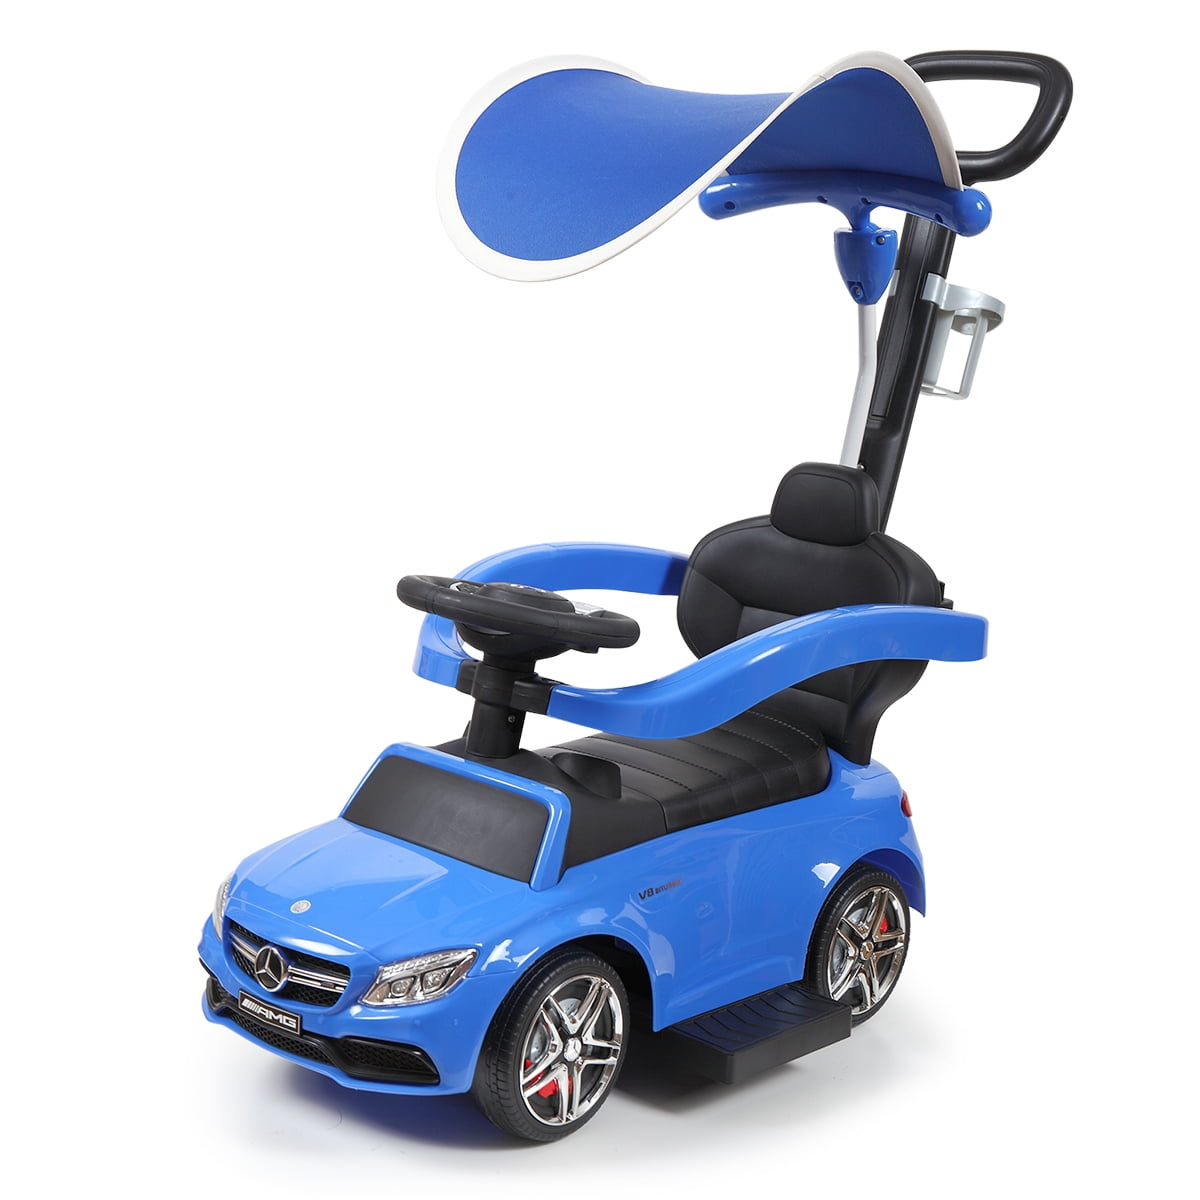 Atlantische Oceaan Volharding Rubriek Push Car for Toddlers, 3 in 1 Licensed Mercedes Benz Car Stroller with  Canopy, Parent Handle, Safety Bar, Cup Holder, Music, Horn and Storage, Baby  Ride on Car for 1-3 Years Boys